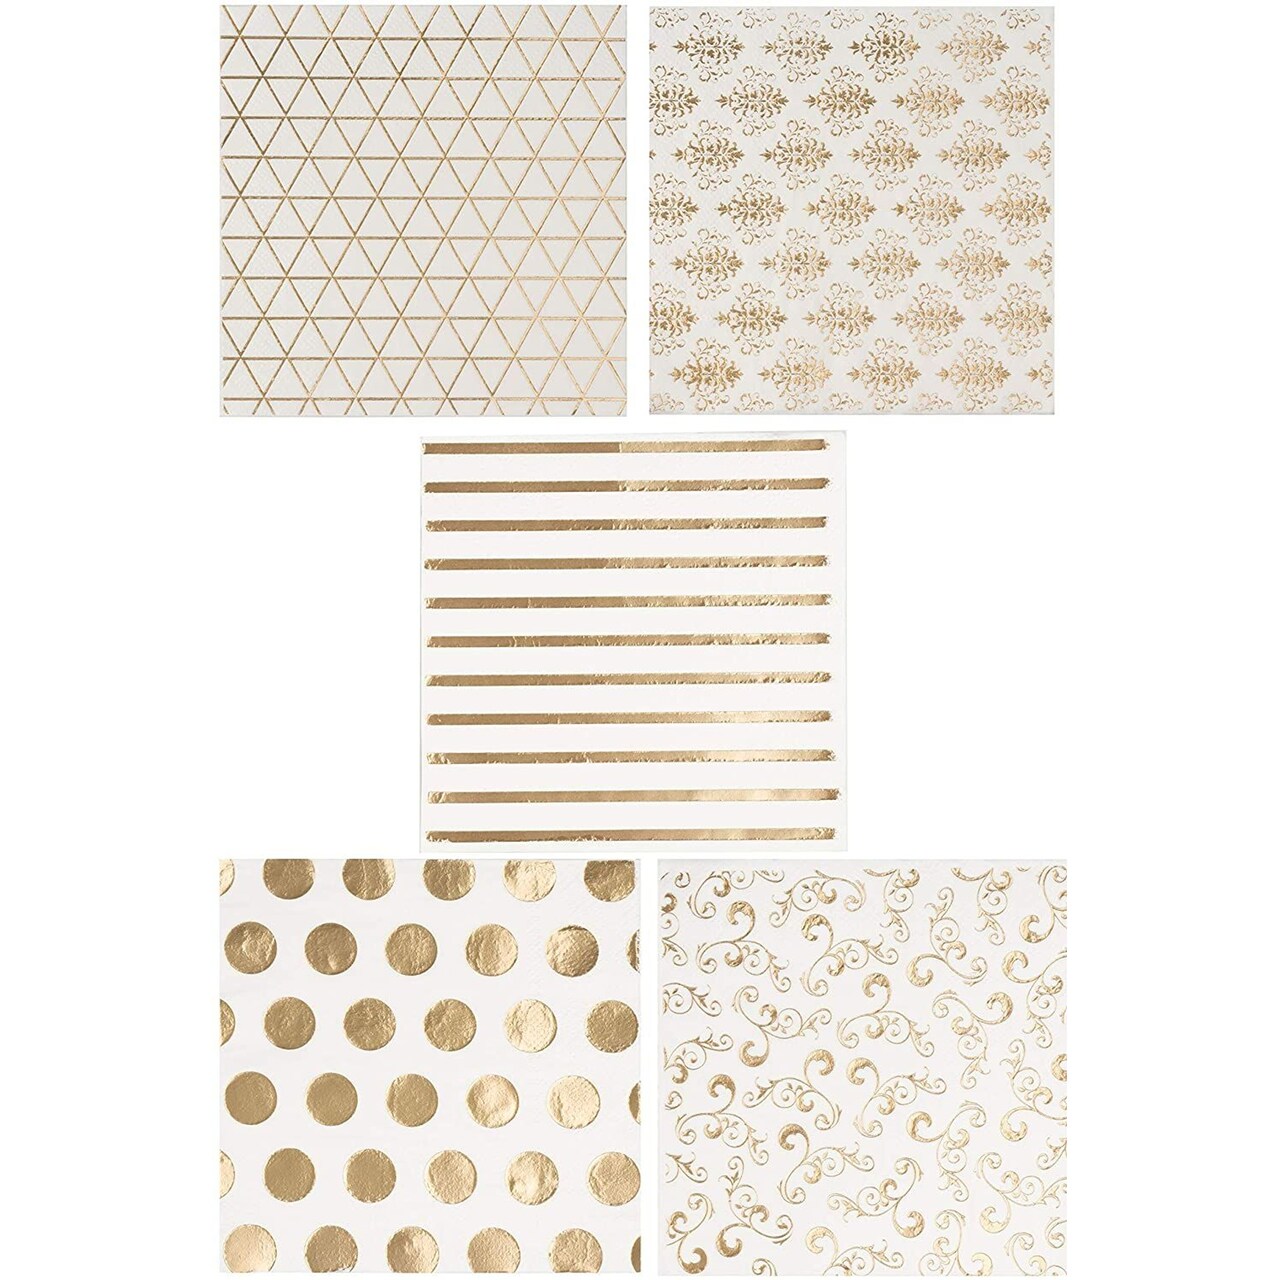 100 Pack White and Gold Paper Napkins - Disposable Cocktail Napkins for Wedding Reception, Birthday, 5x5 In